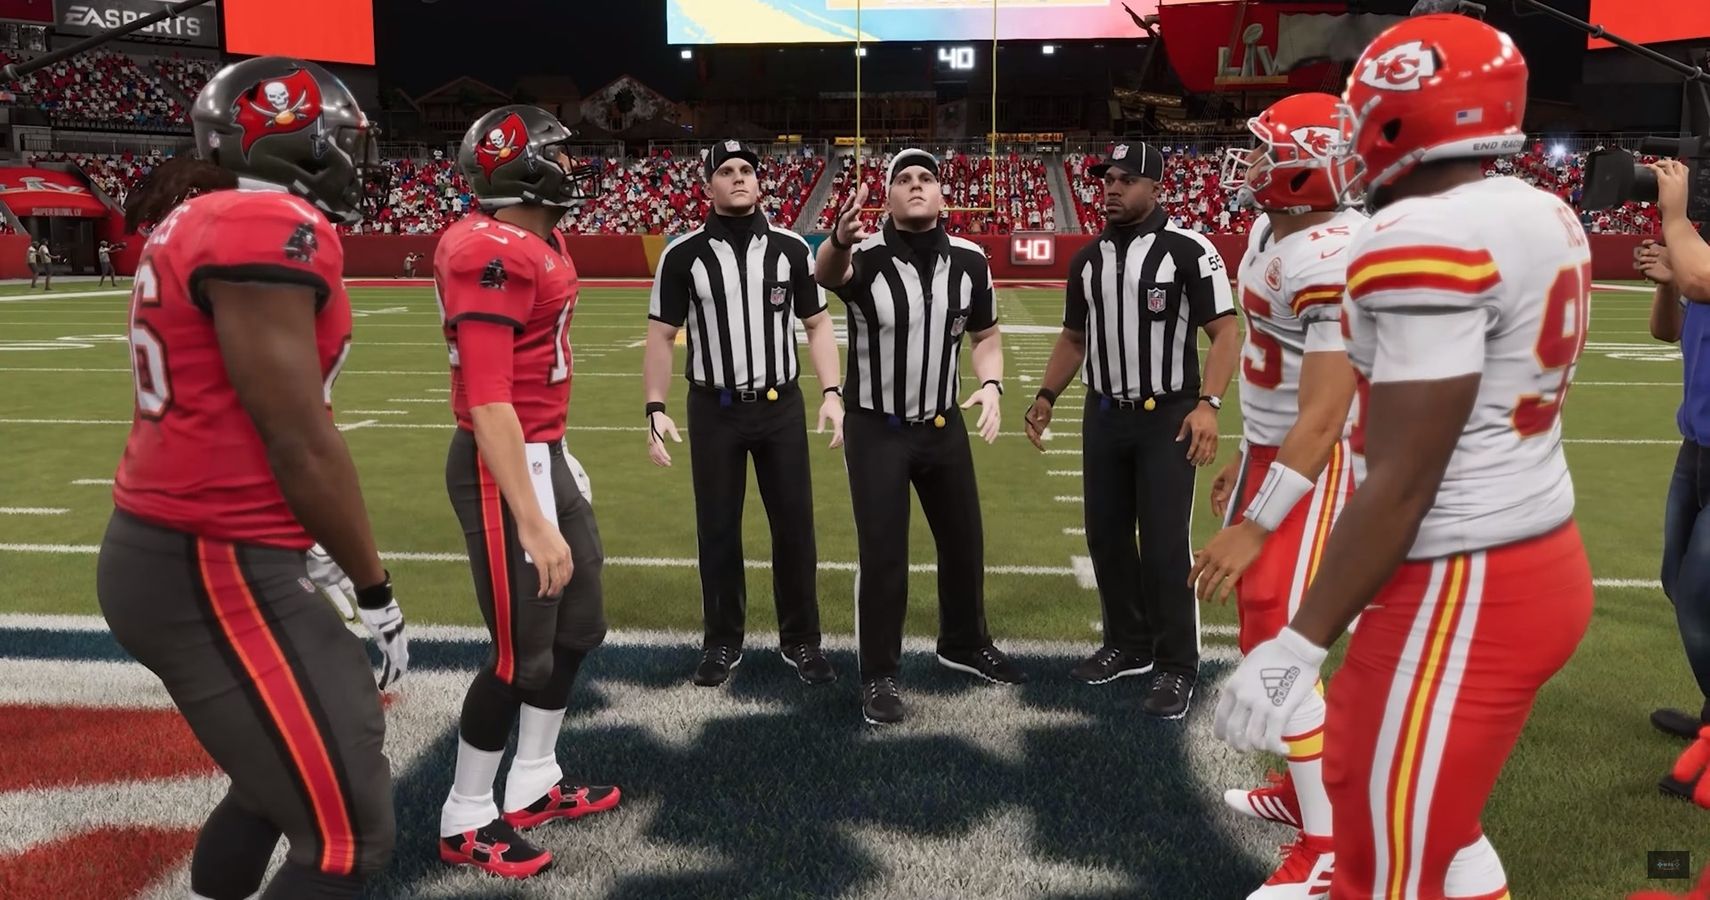 Madden 21 Makes Its Annual Prediction for Kansas City Chiefs to win Super Bowl 55 over Tampa Bay Buccaneers